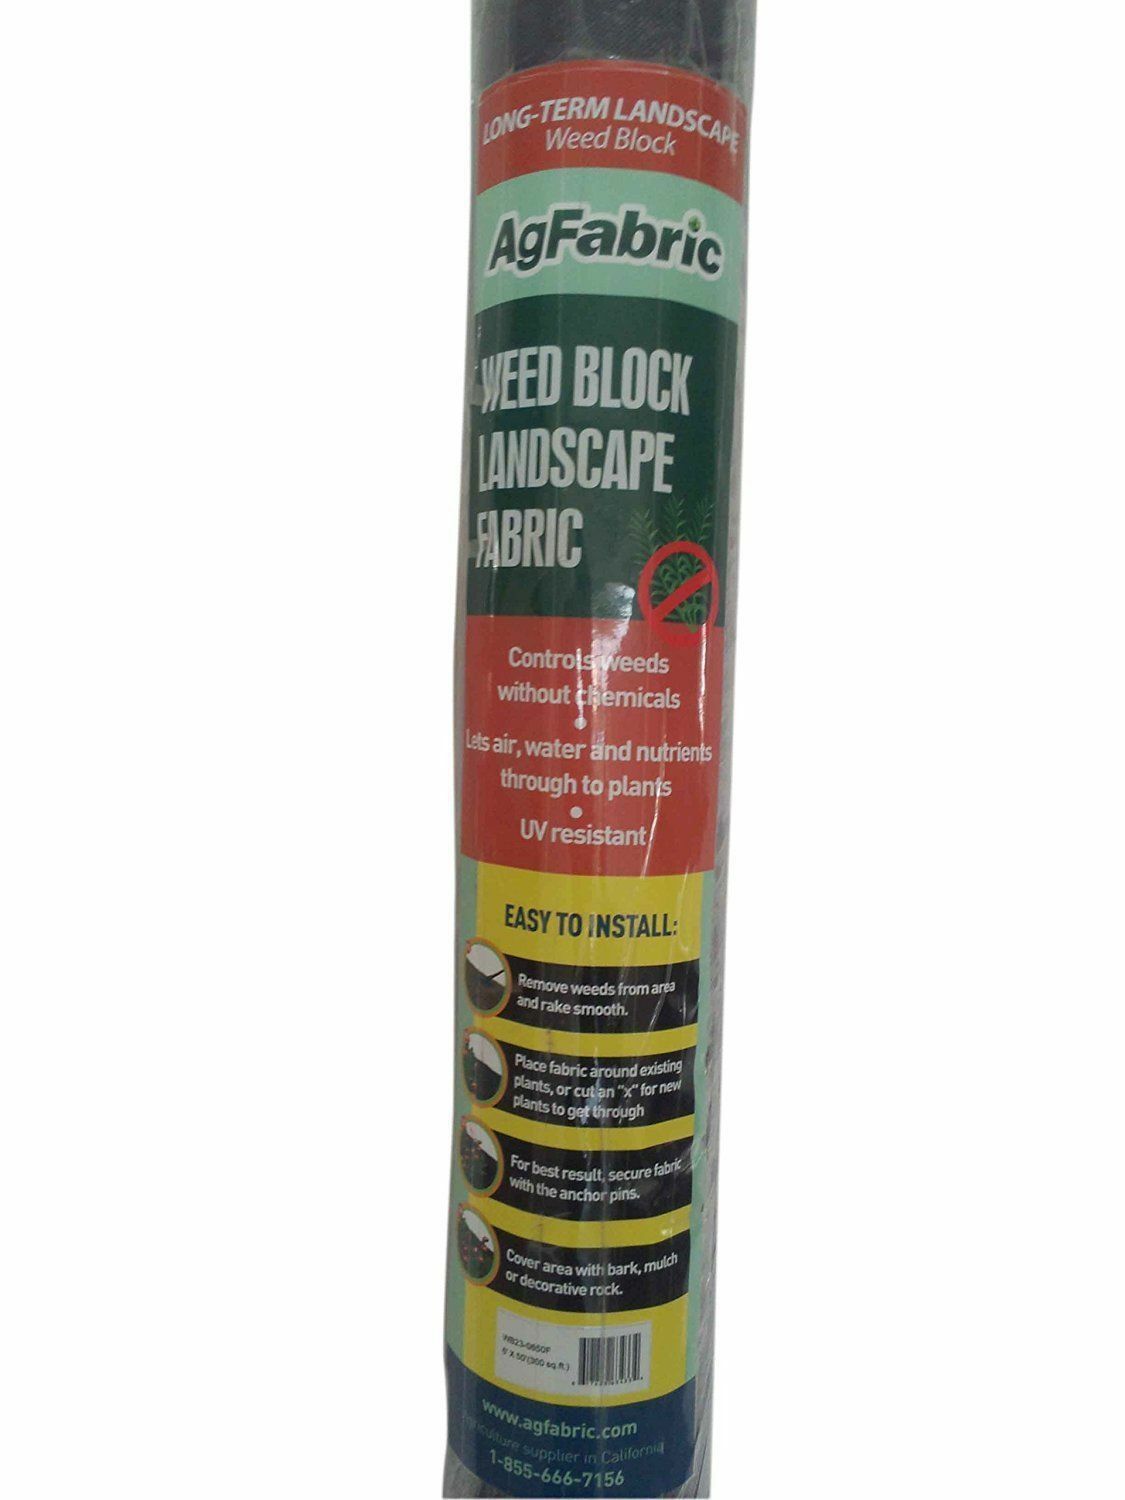 20 Year Landscape Weed Barrier Weed Barrier Block Fabric 3.0ounce Ground Cover